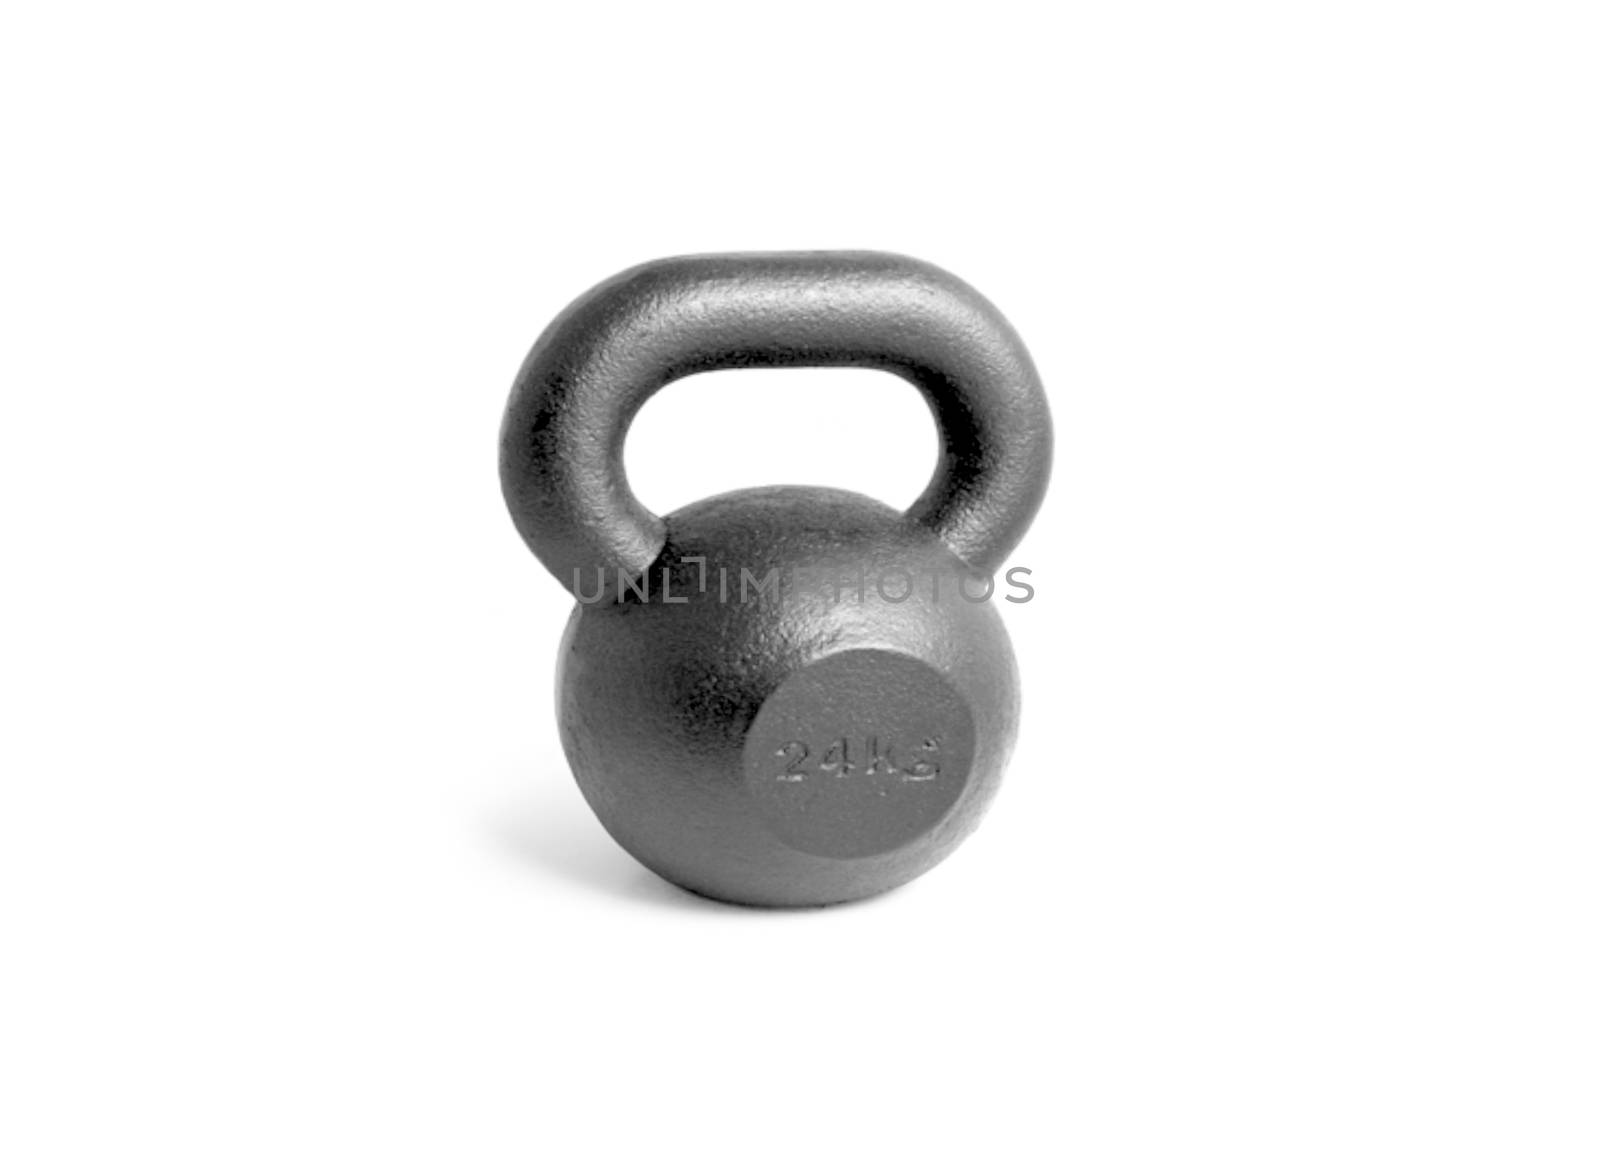 Kettlebell on a white background